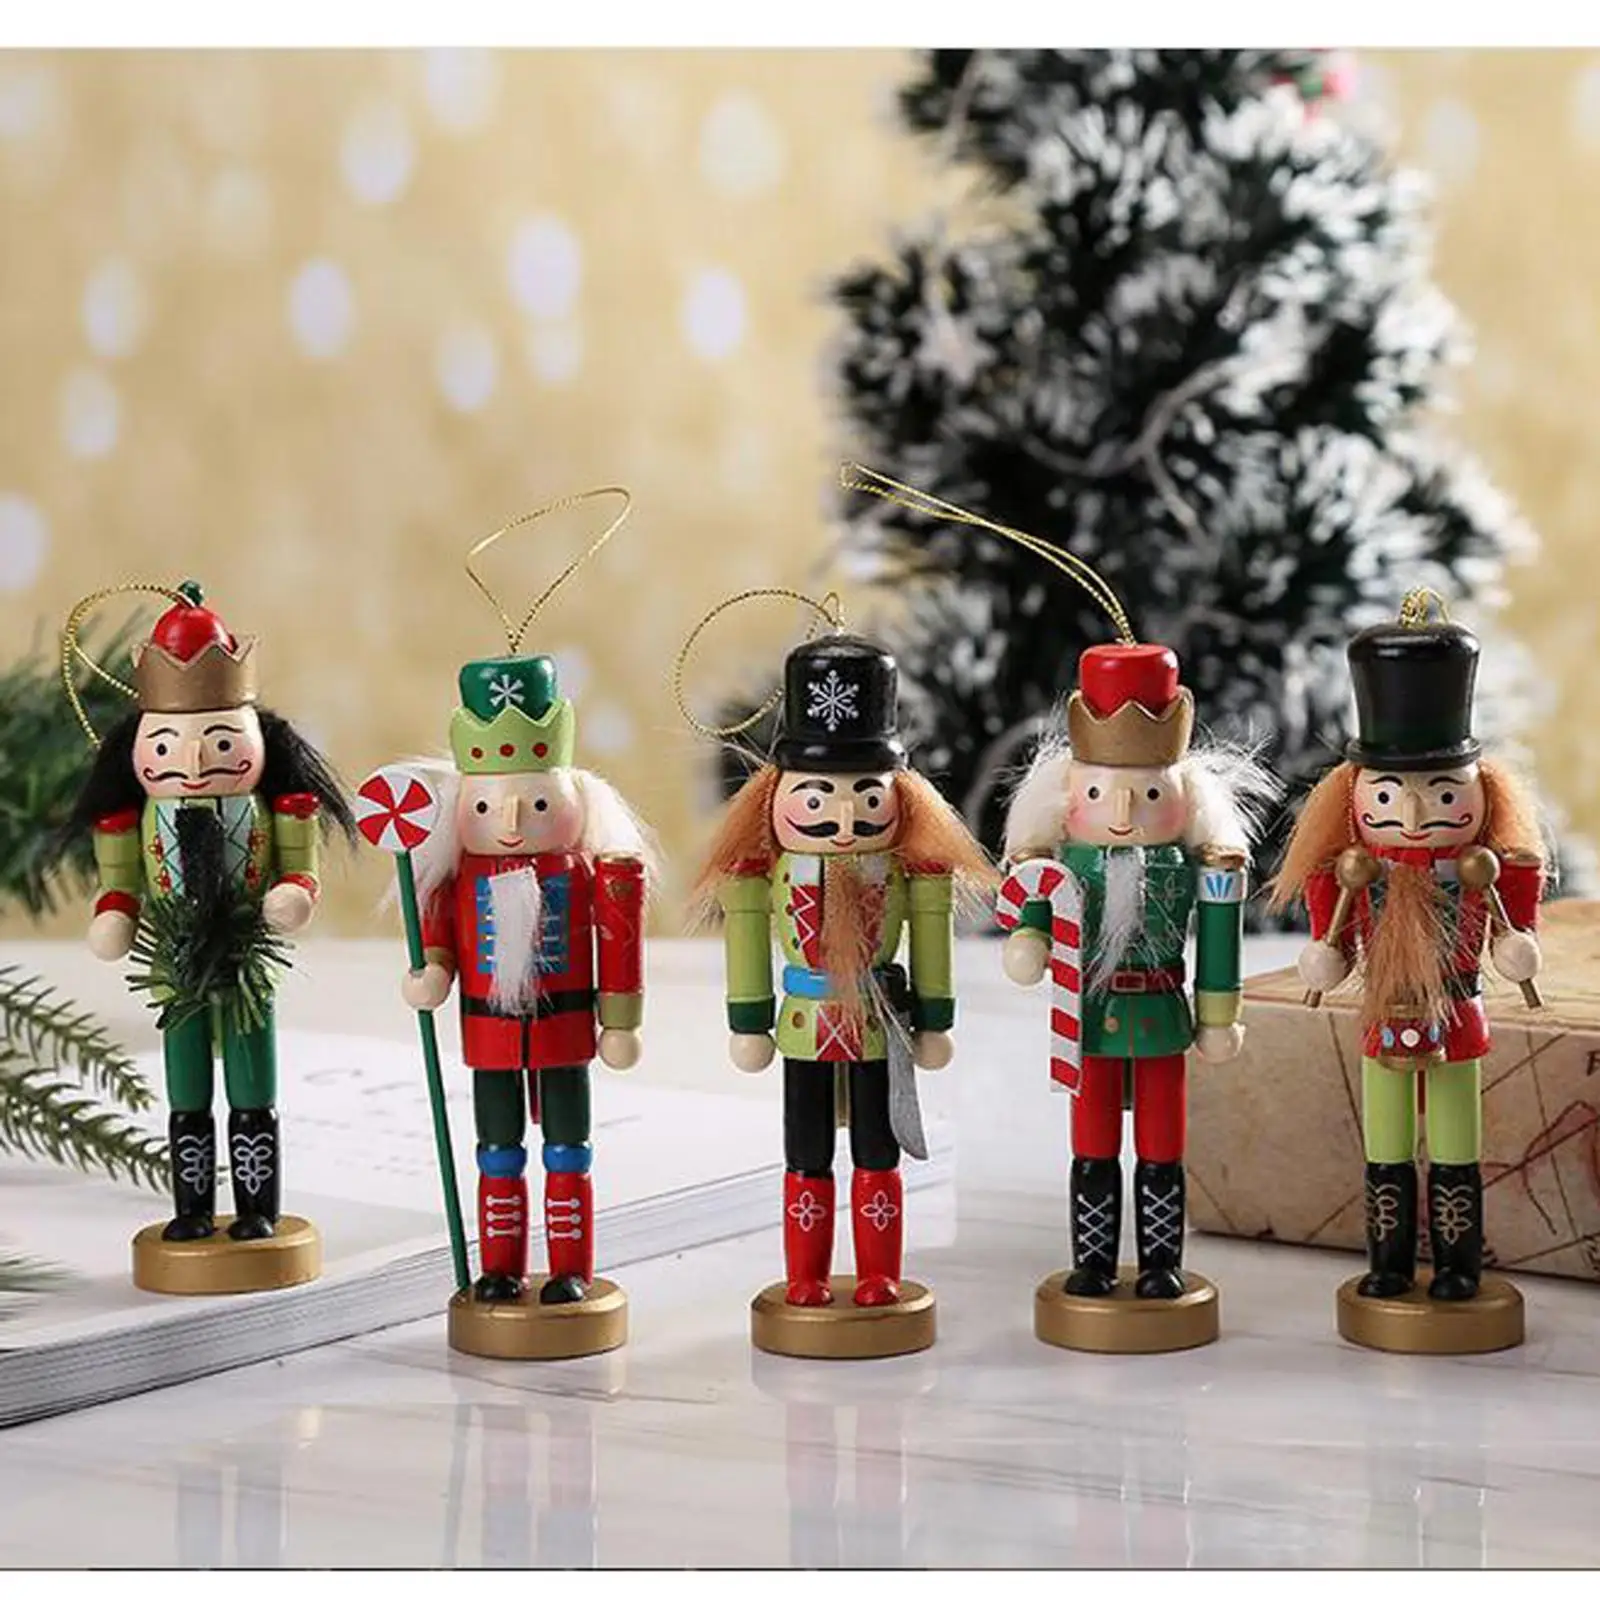 Christmas Nutcrackers ing Ornament Wooden Soldier Figures Doll Christmas Tree ing Ornaments with Package Box